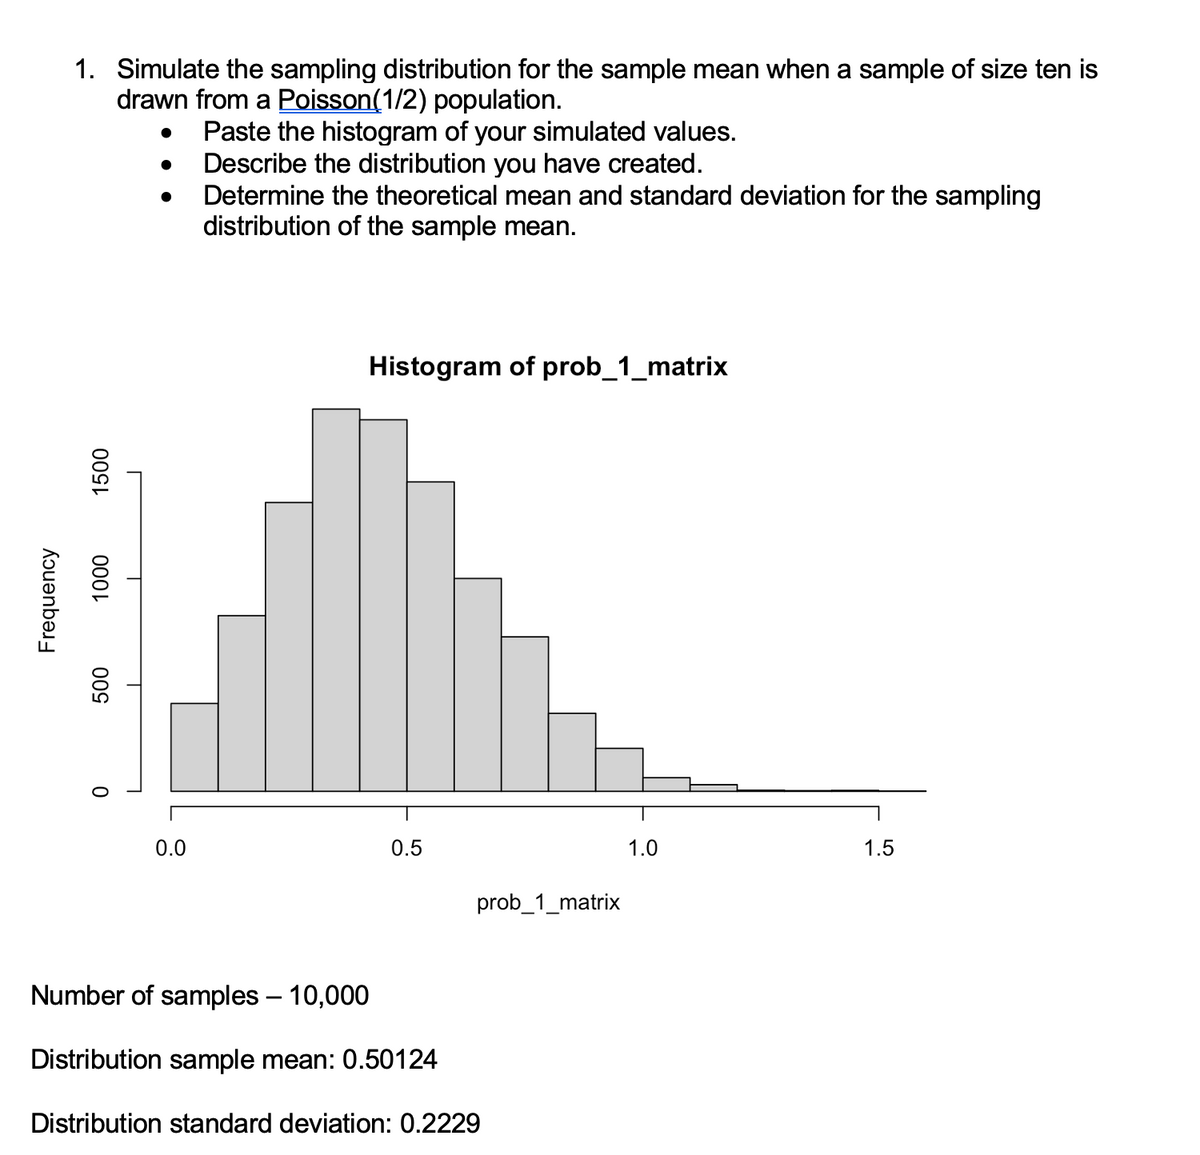 Frequency
1. Simulate the sampling distribution for the sample mean when a sample of size ten is
drawn from a Poisson(1/2) population.
Paste the histogram of your simulated values.
1500
1000
500
●
●
0.0
Describe the distribution you have created.
Determine the theoretical mean and standard deviation for the sampling
distribution of the sample mean.
Histogram of prob_1_matrix
0.5
prob_1_matrix
Number of samples - 10,000
Distribution sample mean: 0.50124
Distribution standard deviation: 0.2229
1.0
1.5